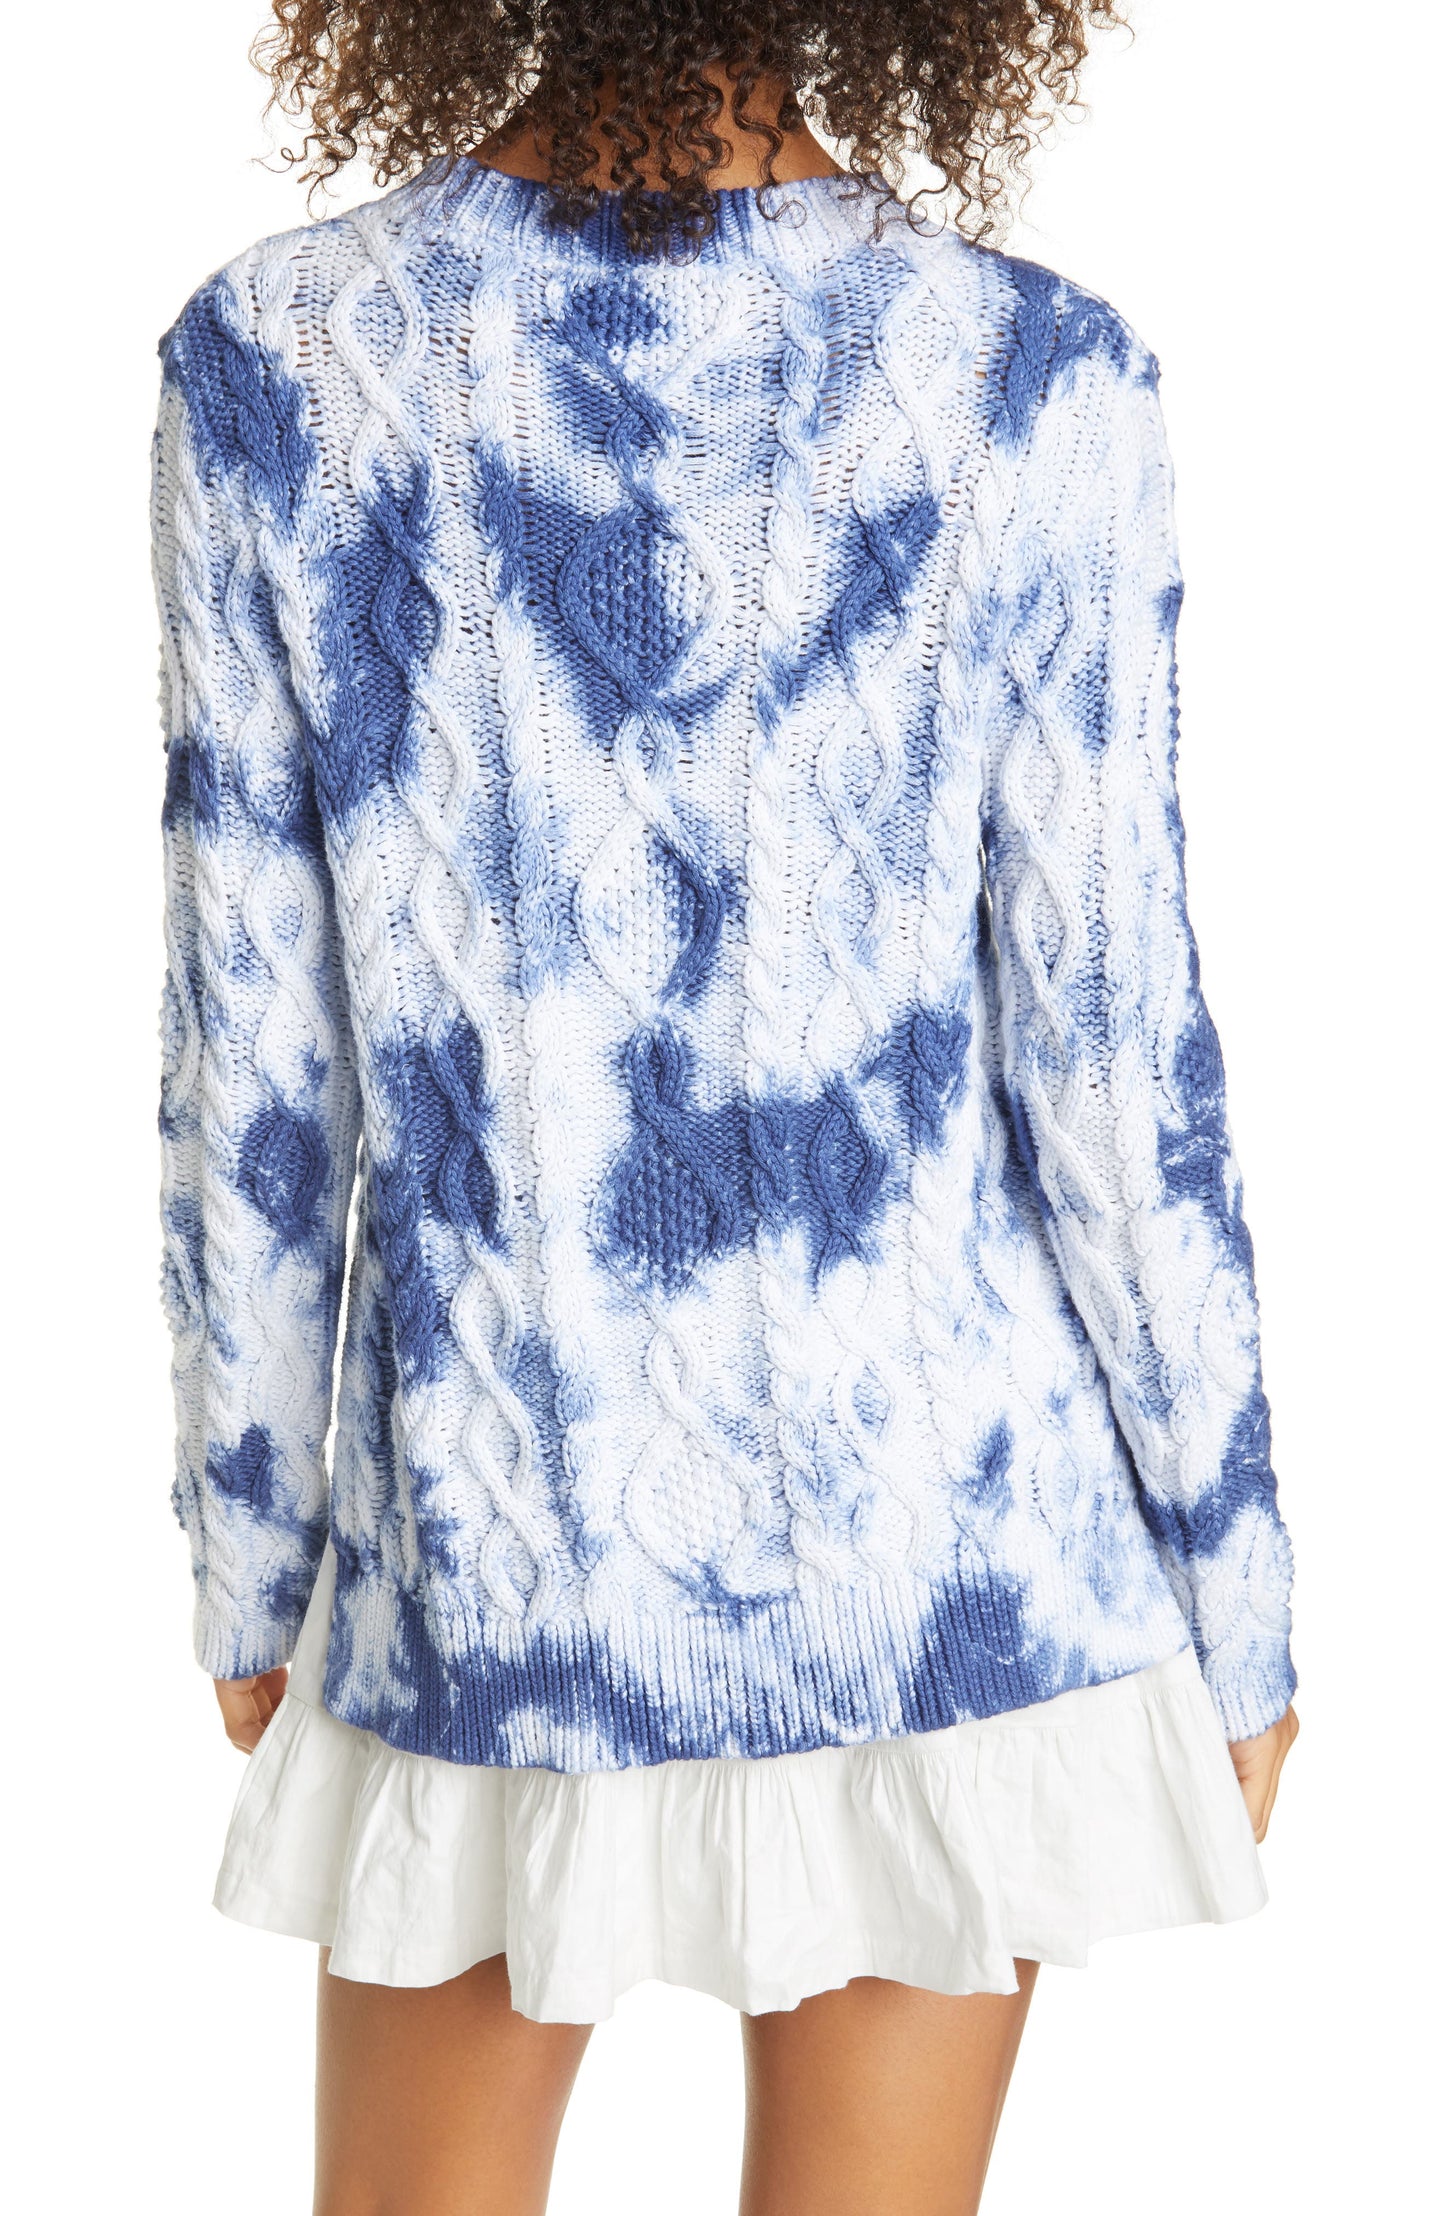 NICOLE MILLER two-tone winter sweater, white and blue, size L